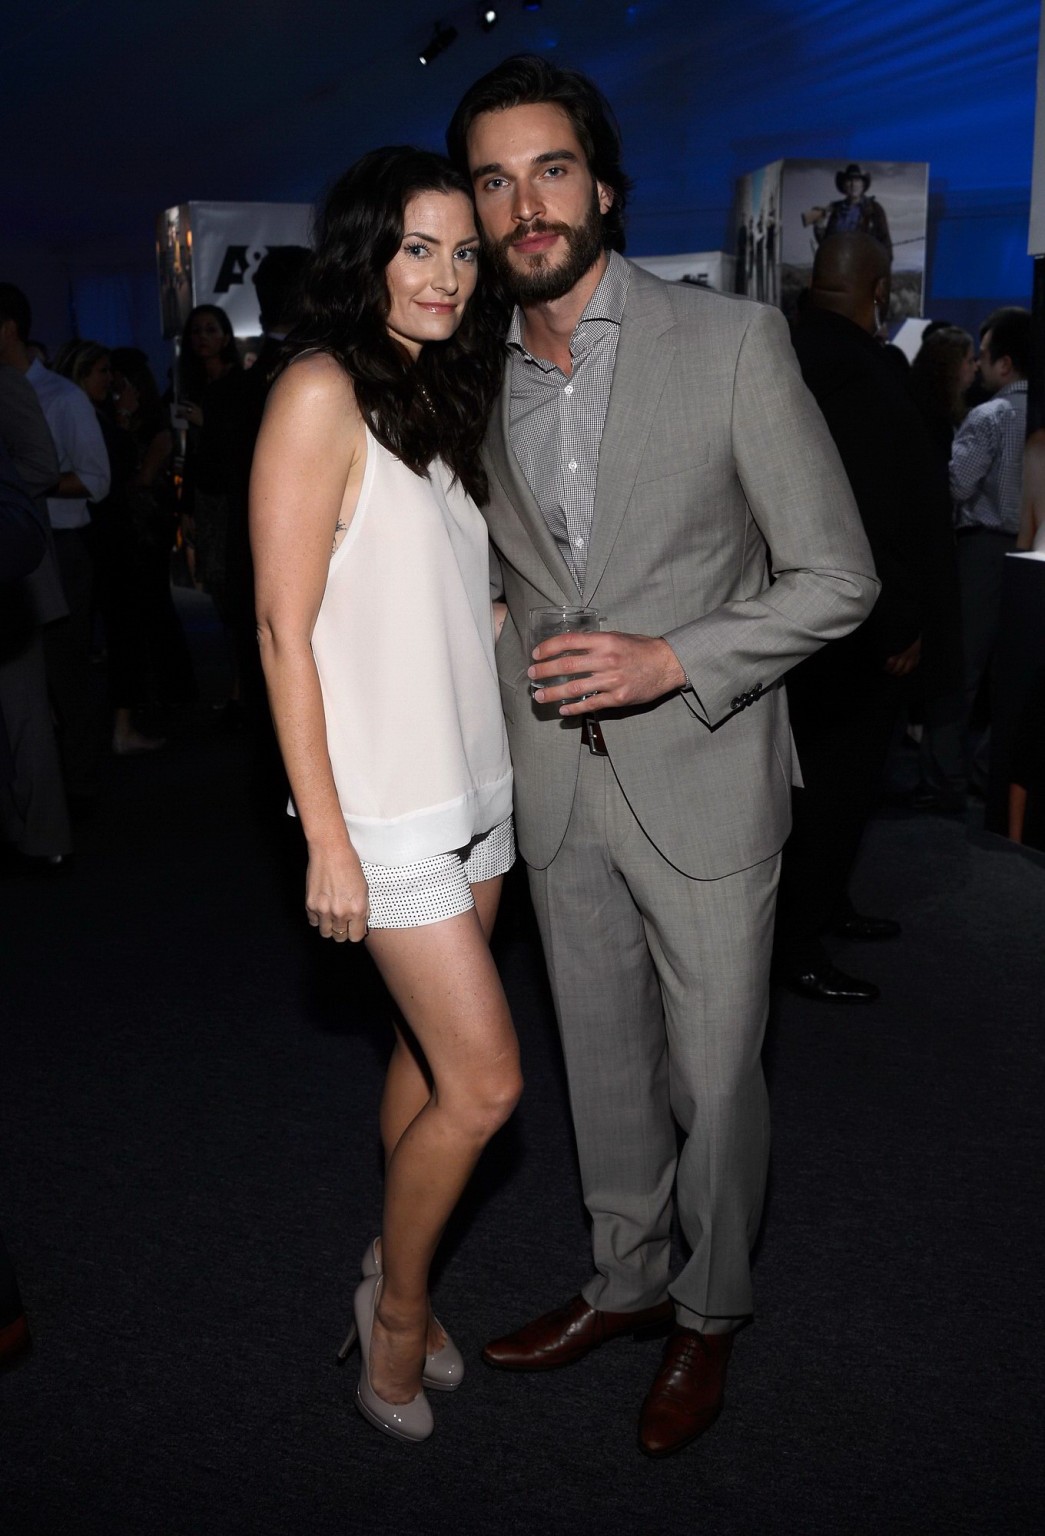 Madchen Amick leggy wearing shorts at the  A E Networks Upfront in NYC #75232625